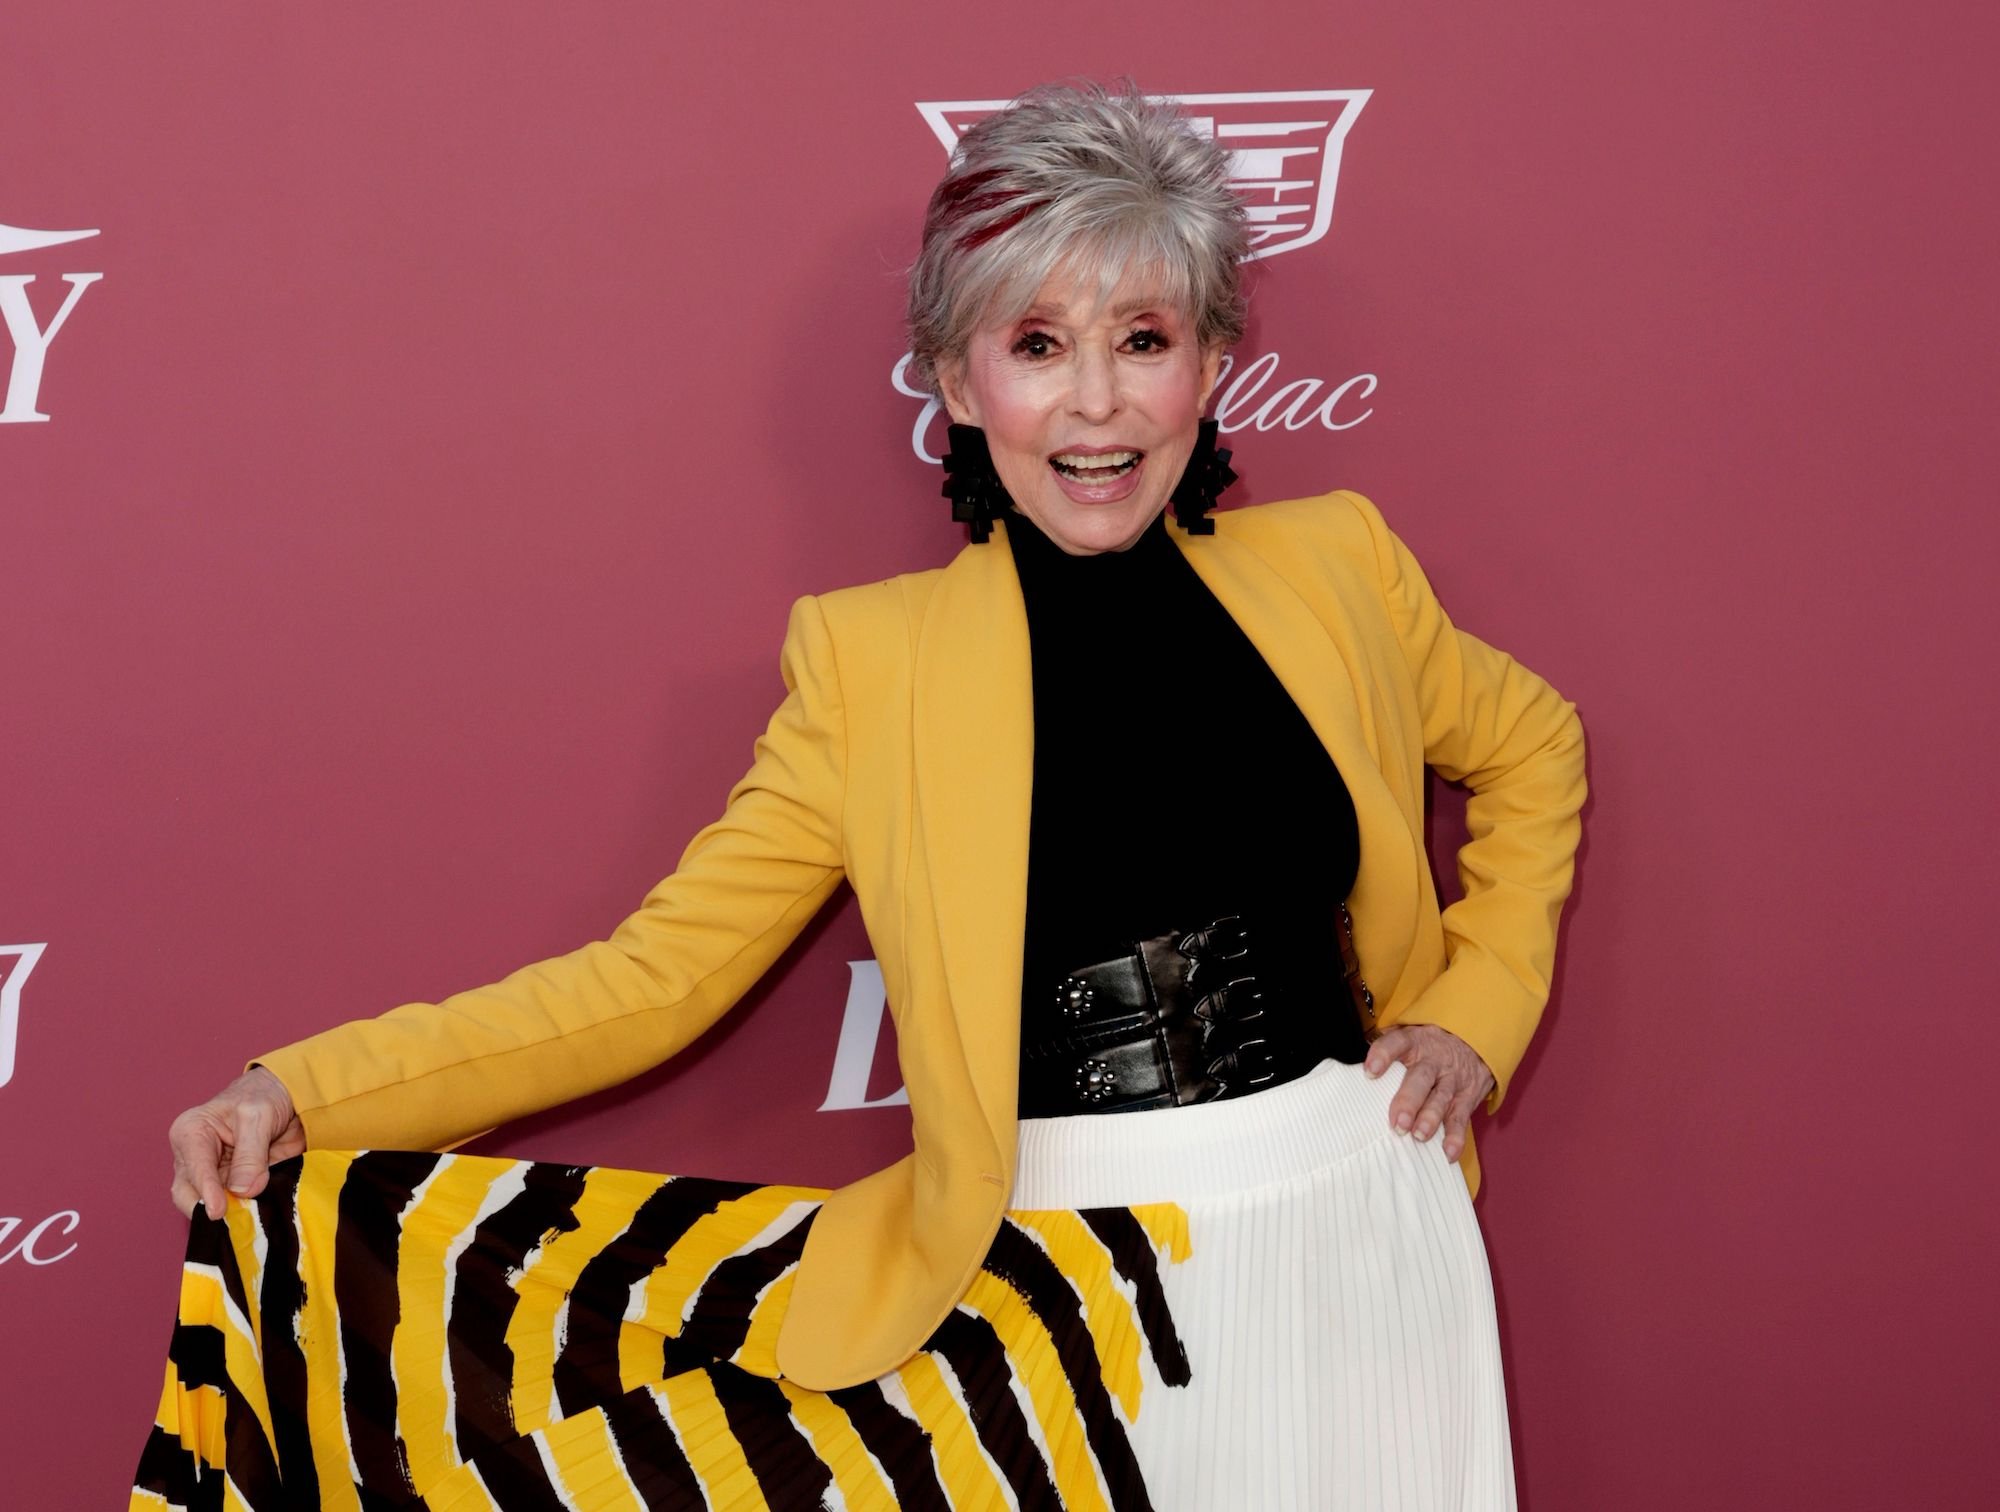 Honoree Rita Moreno attends Variety's Power Of Women event on Sept. 30, 2021 in California. She stands in front of a mauve backdrop wearing a black top, bright yellow suit jacket, and white, black, and yellow patterned skirt. She holds her skirt out to the side as she smiles for the camera on the event's red carpet.